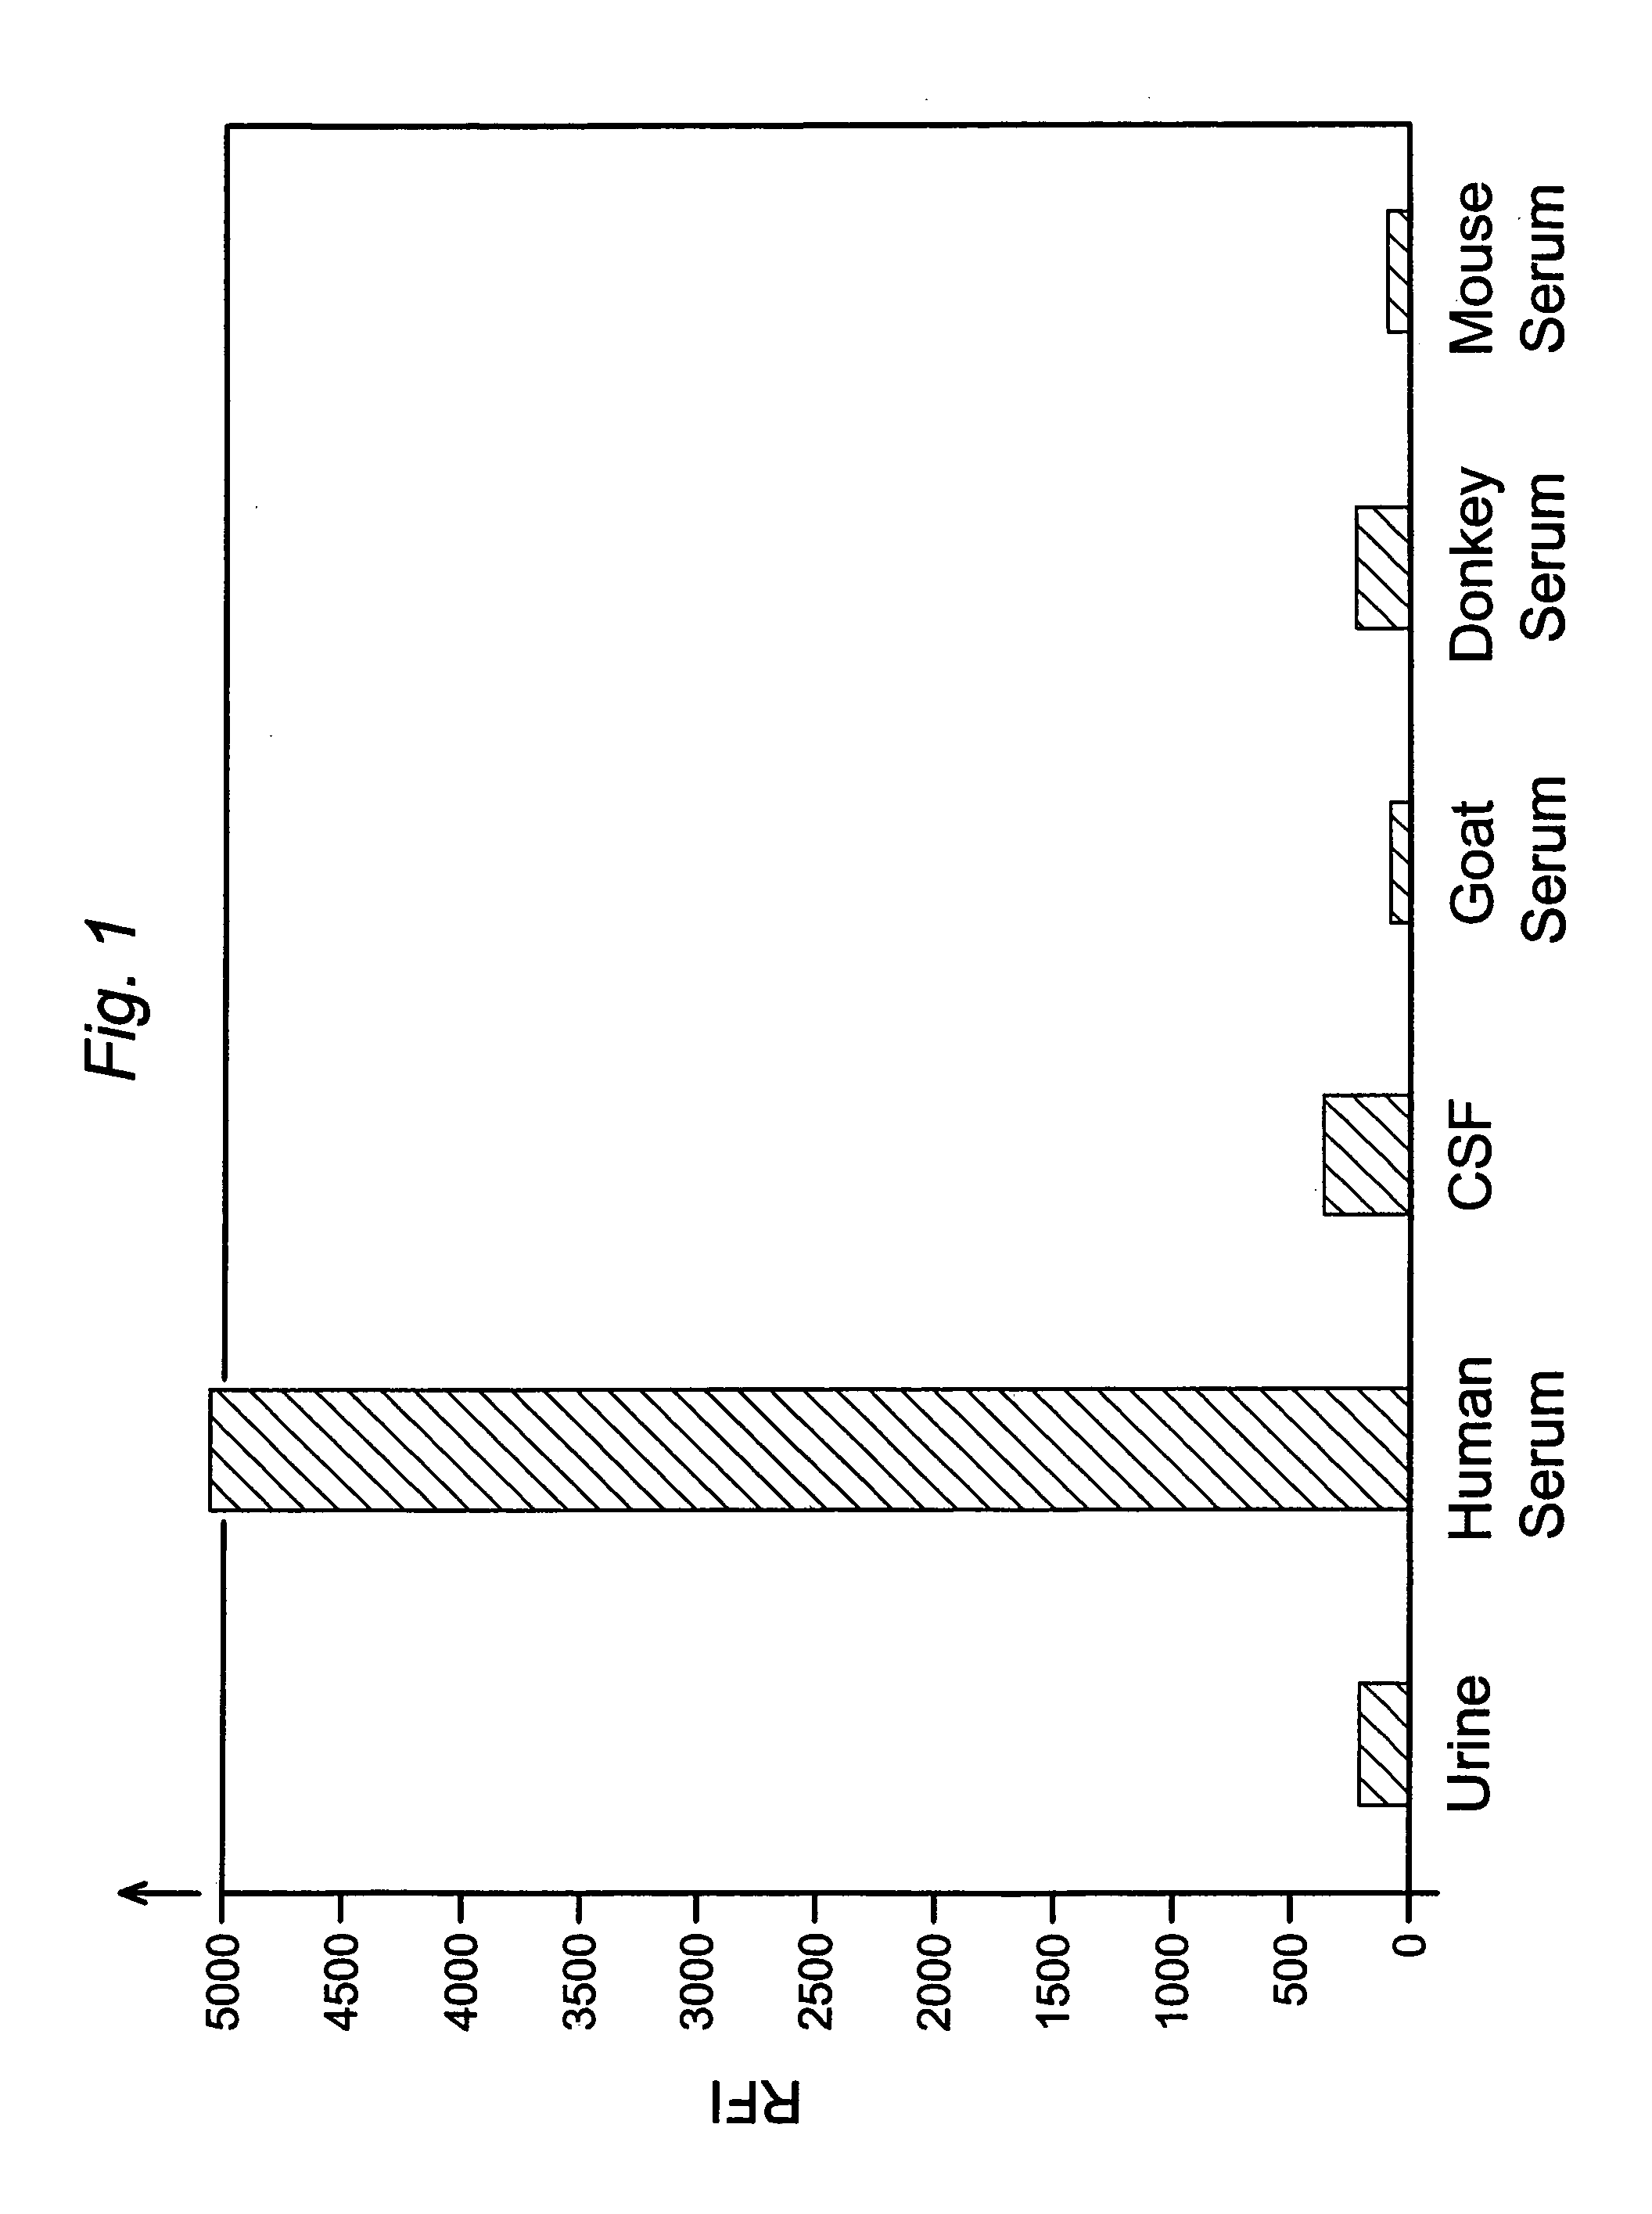 FXIII detection for verifying serum sample and sample size and for detecting dilution